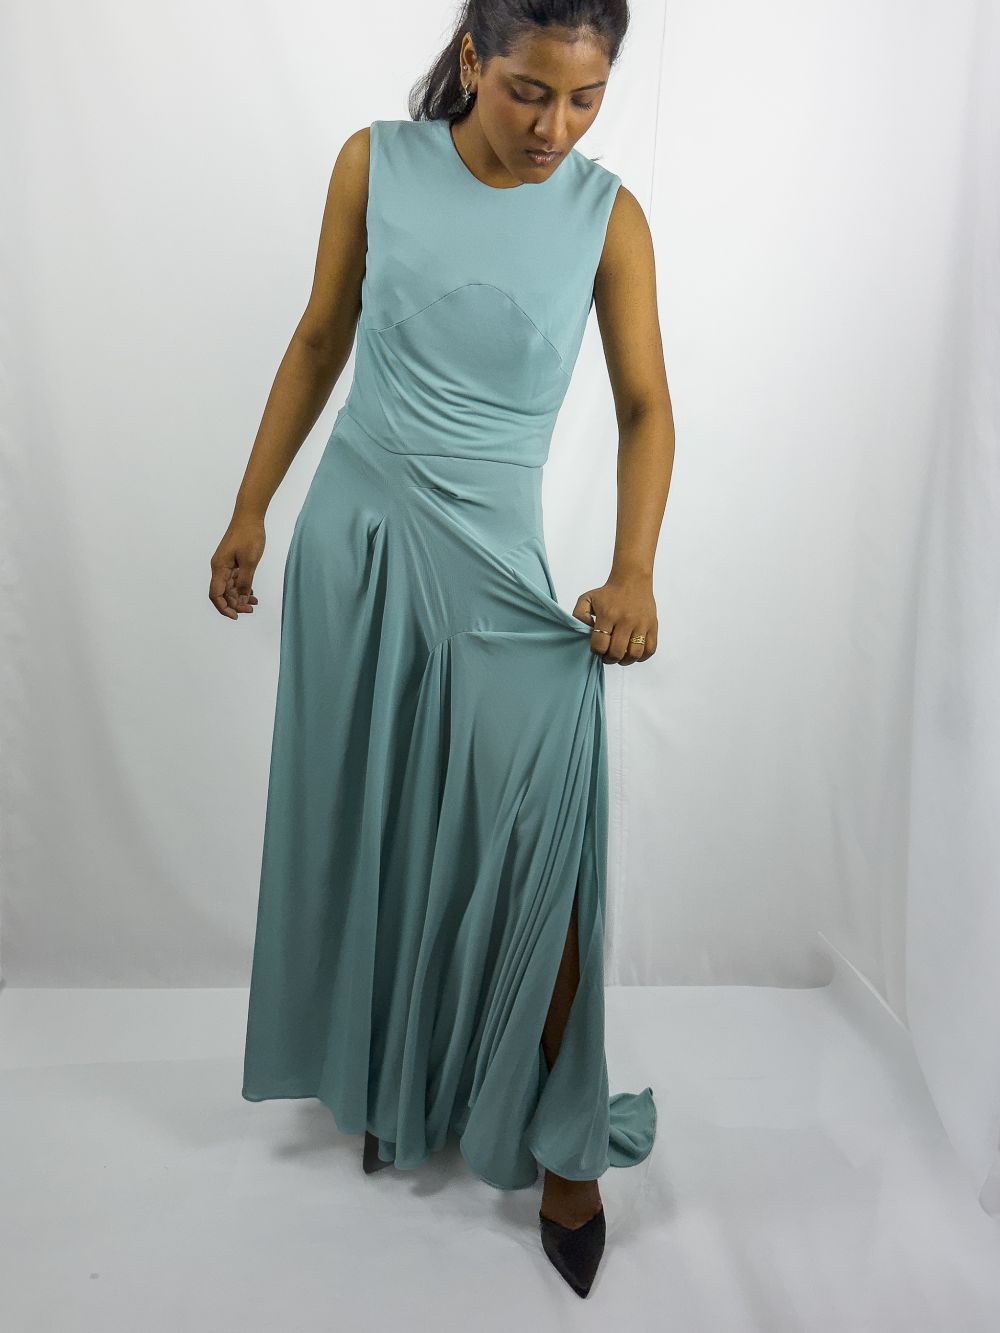 Model wearing pale blue Popo dress made by Nelson Choga